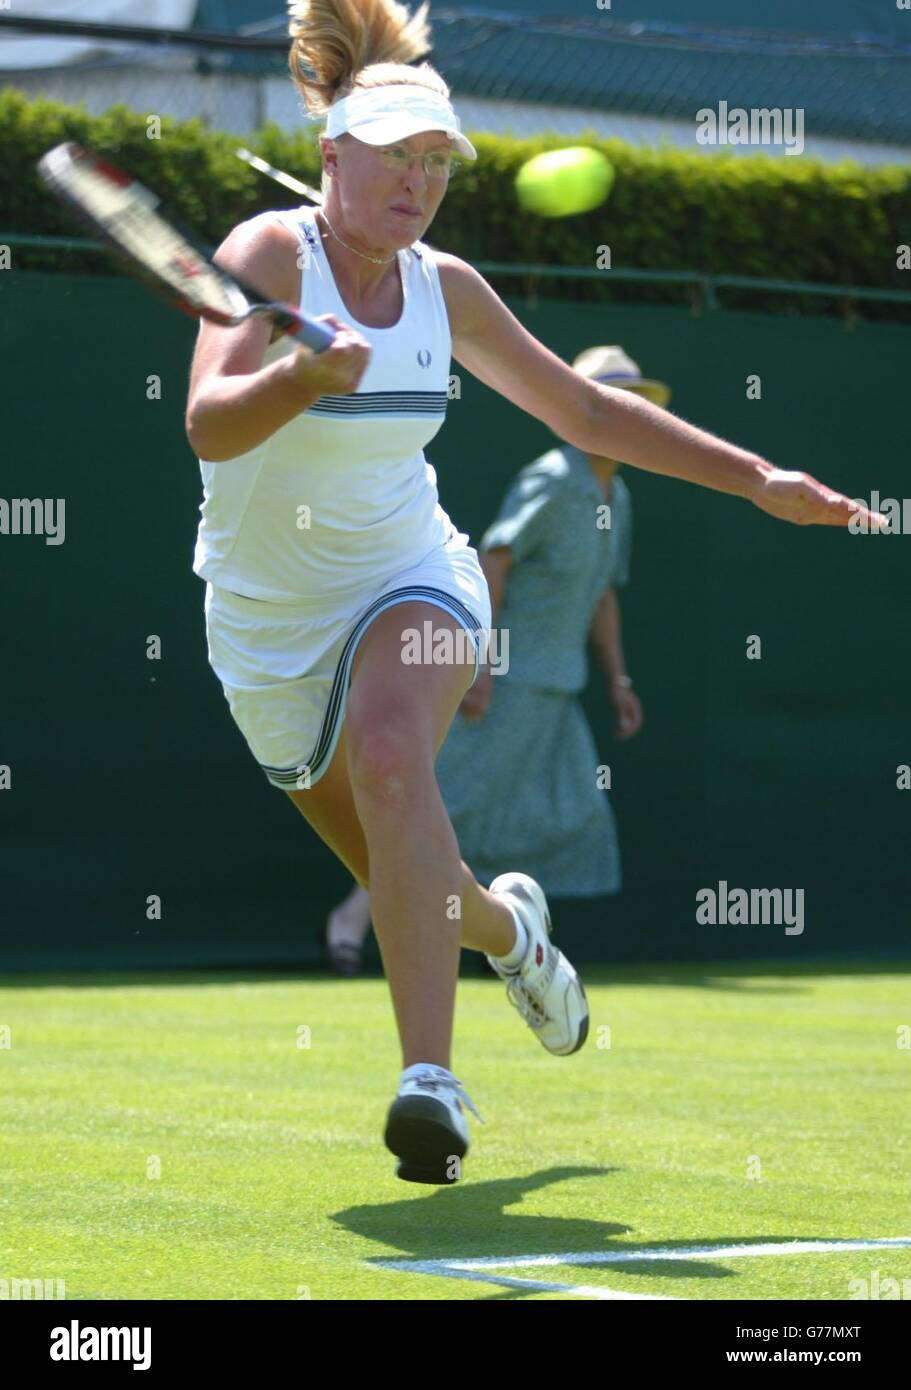 , NO MOBILE PHONE USAGE. Britain's Elena Baltacha in action against Jelena Dokic of Serbia Montenegro at the All England Lawn Tennis Championships in Wimbledon. Stock Photo